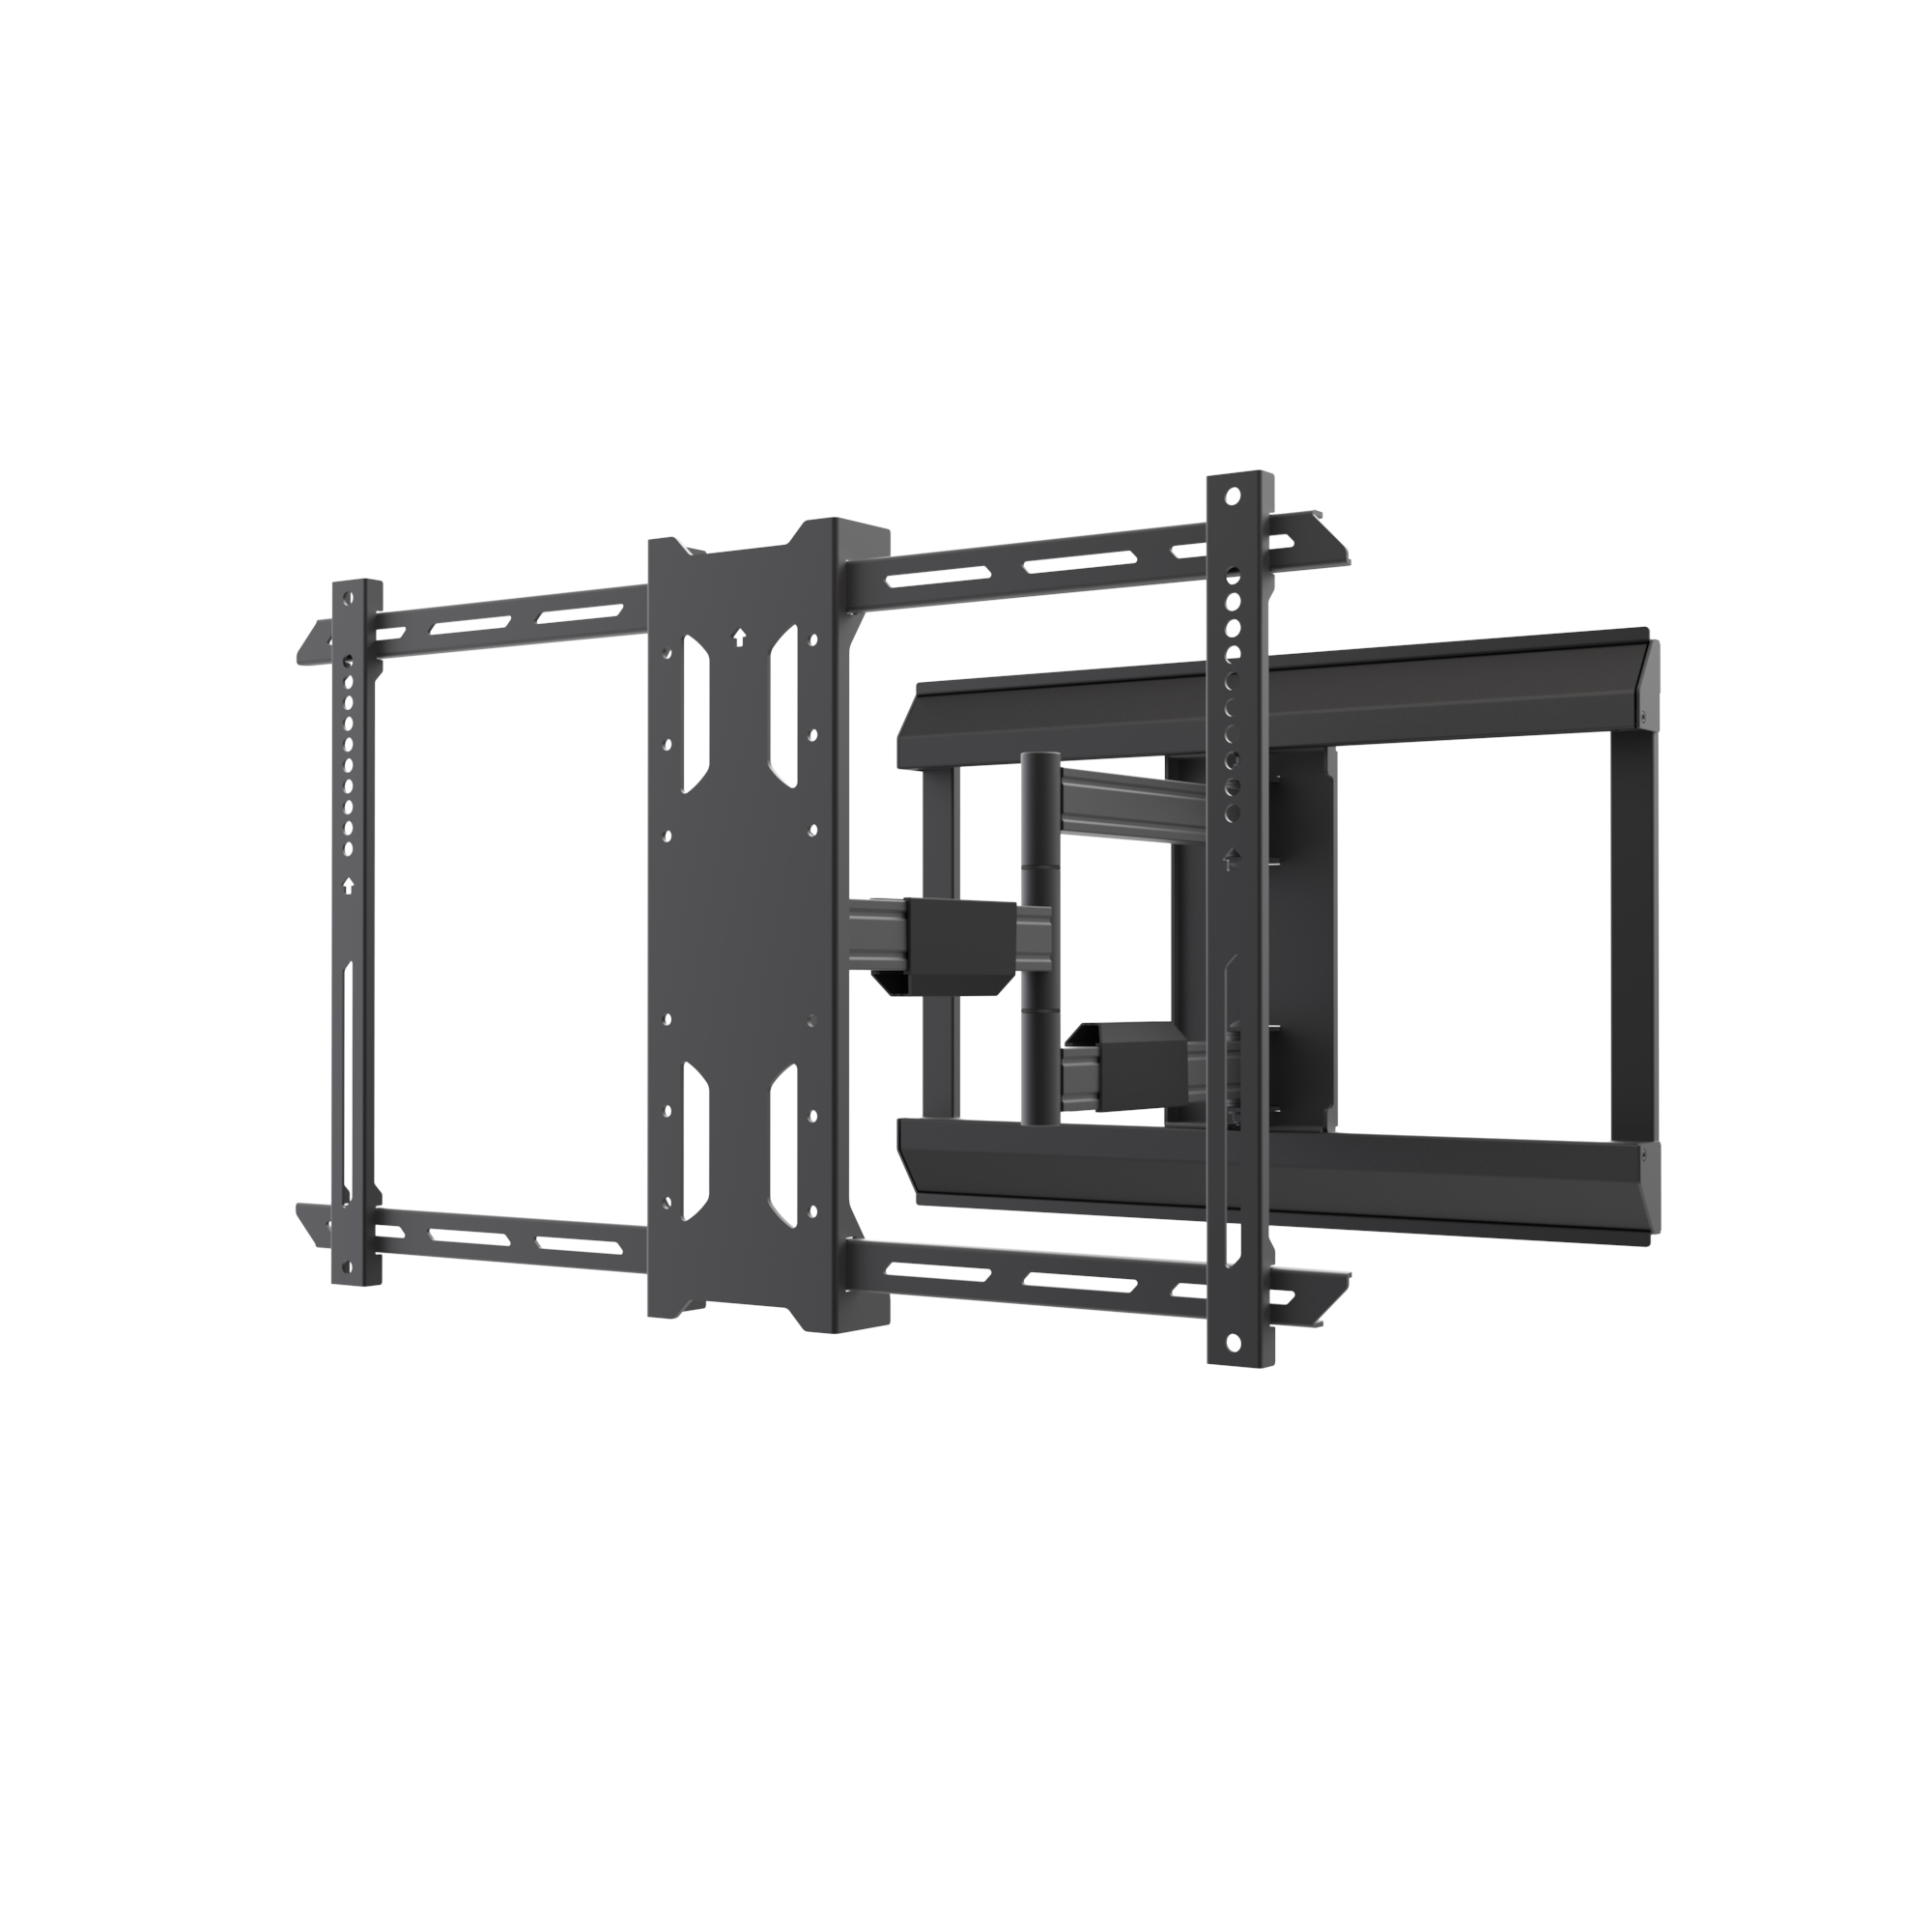 DirectConnect LANDMARK SERIES Articulating Mount; 120 lb Max, Recommended for 39-70" TV, up to 600 X 400 Vesa, 23" of Max Extension, 22" Horizontal Offset ** EXTRA FREIGHT ITEM ** **USE 3/8" Bit for Masonary**